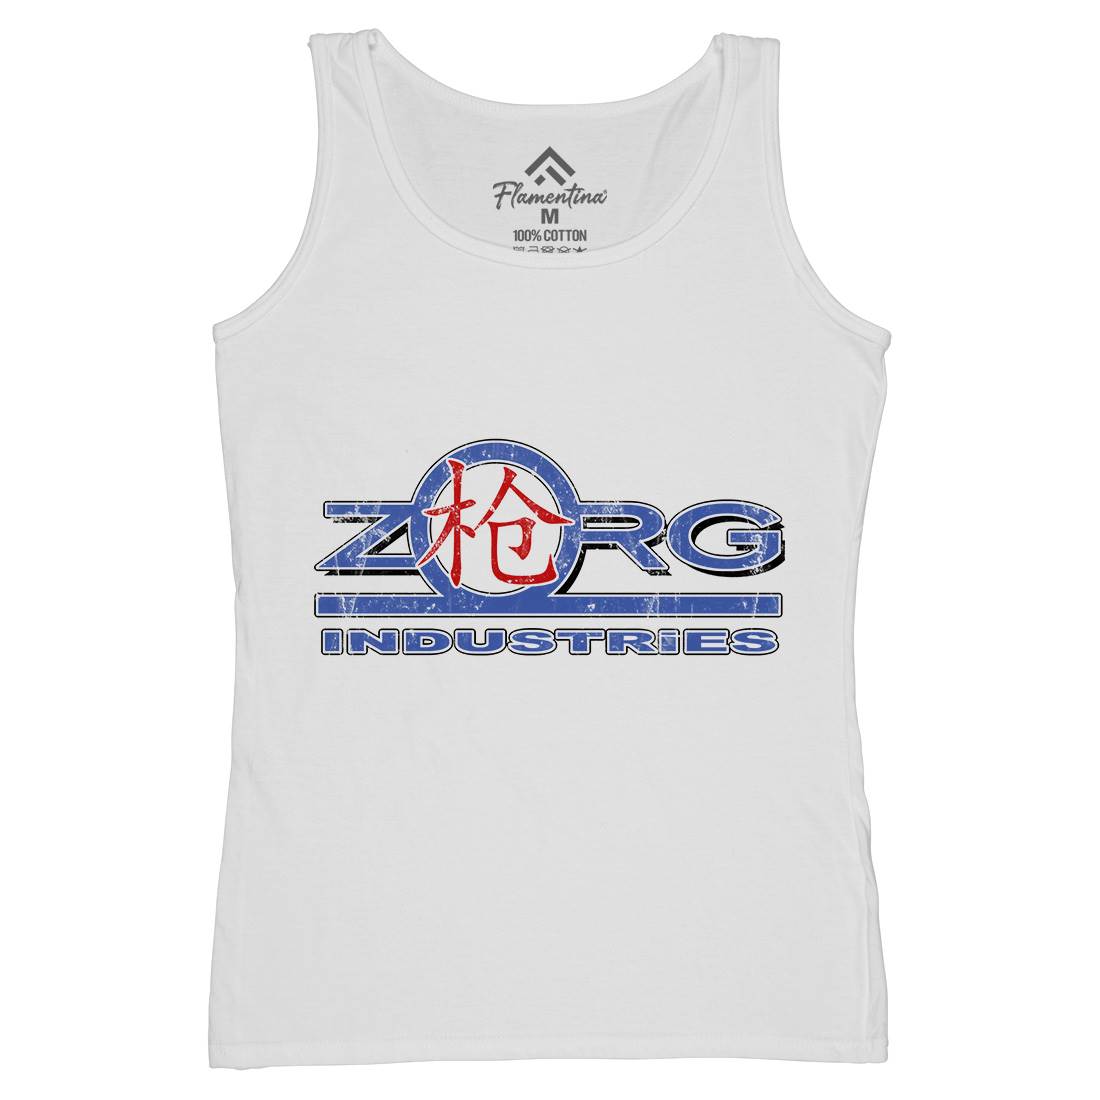 Zorg Ind Womens Organic Tank Top Vest Space D105